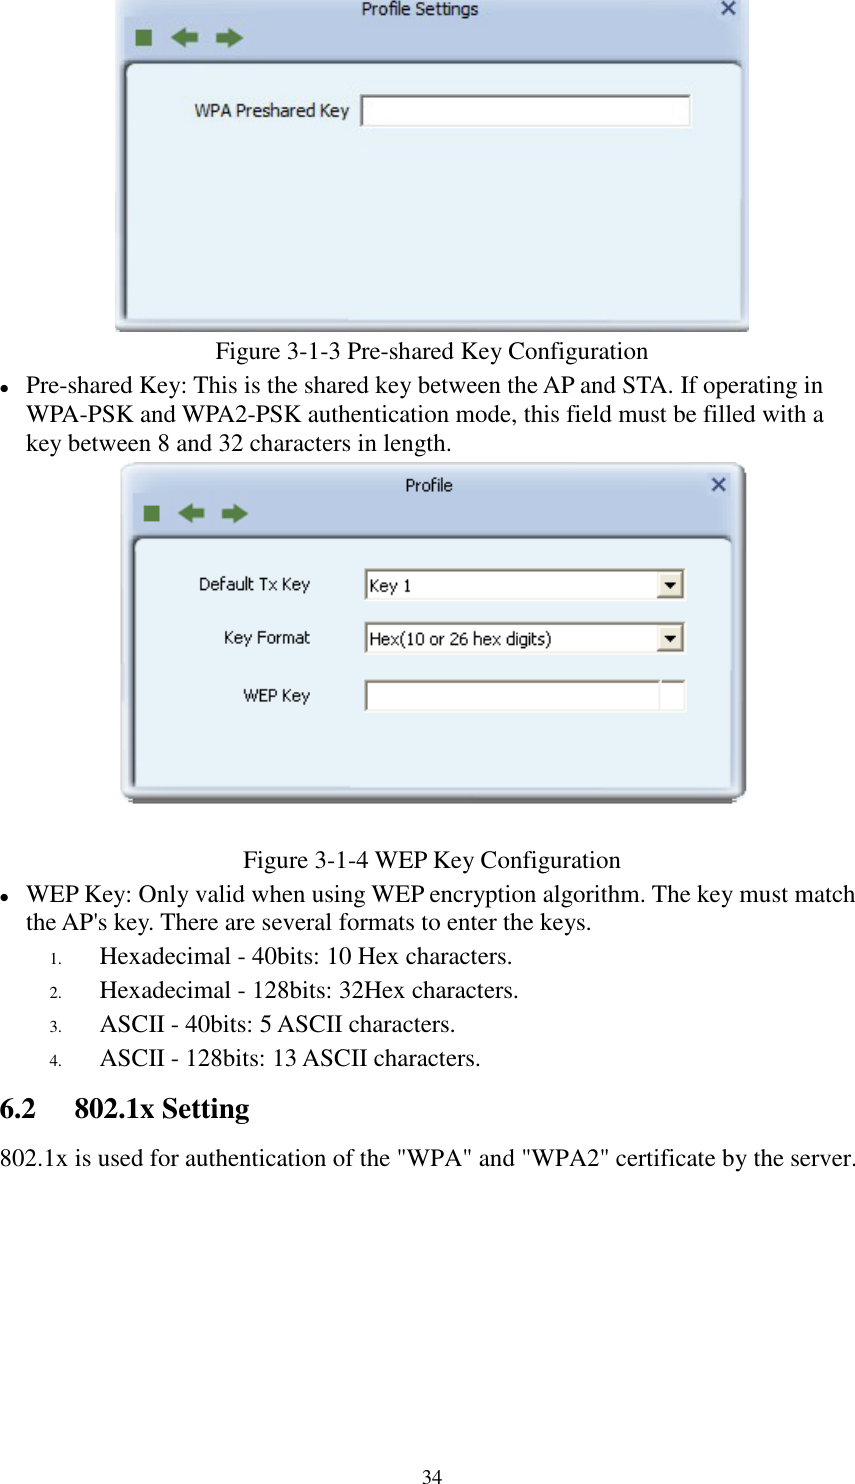 34Figure 3-1-3 Pre-shared Key ConfigurationPre-shared Key: This is the shared key between the AP and STA. If operating inWPA-PSK and WPA2-PSK authentication mode, this field must be filled with akey between 8 and 32 characters in length.Figure 3-1-4 WEP Key ConfigurationWEP Key: Only valid when using WEP encryption algorithm. The key must matchthe AP&apos;s key. There are several formats to enter the keys.1. Hexadecimal - 40bits: 10 Hex characters.2. Hexadecimal - 128bits: 32Hex characters.3. ASCII - 40bits: 5 ASCII characters.4. ASCII - 128bits: 13 ASCII characters.6.2 802.1x Setting802.1x is used for authentication of the &quot;WPA&quot; and &quot;WPA2&quot; certificate by the server.